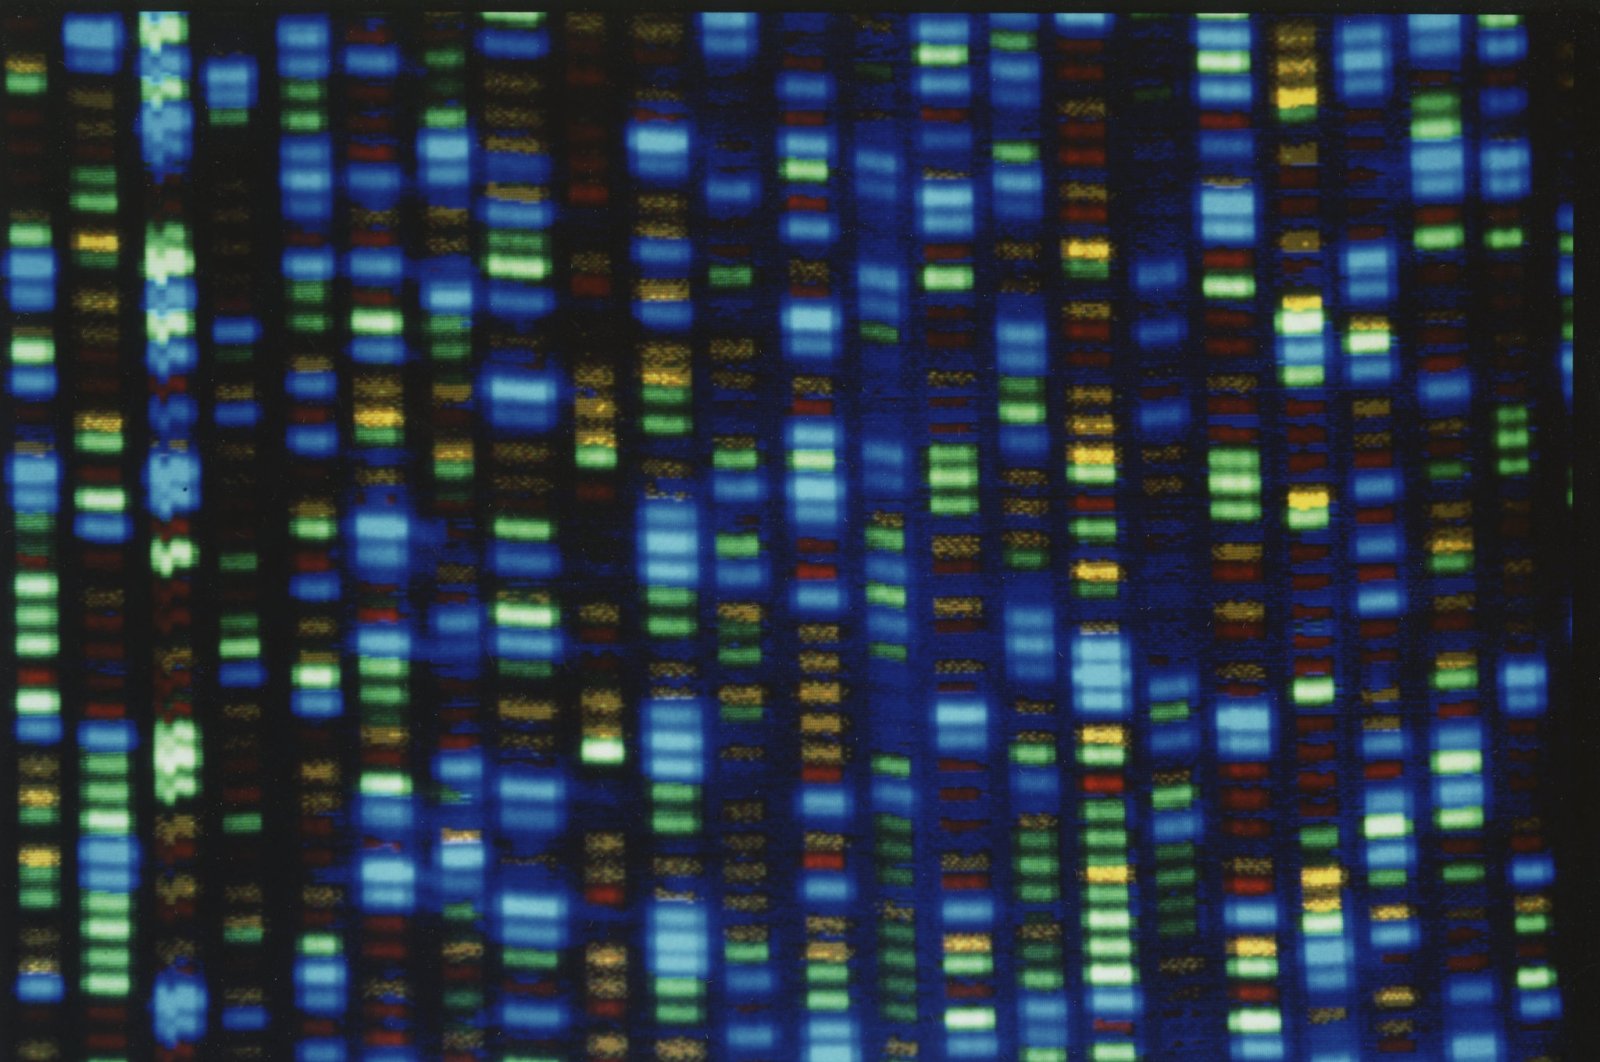 Output from a DNA sequencer is seen in this undated image made available by the National Human Genome Research Institute. (NHGRI via AP)